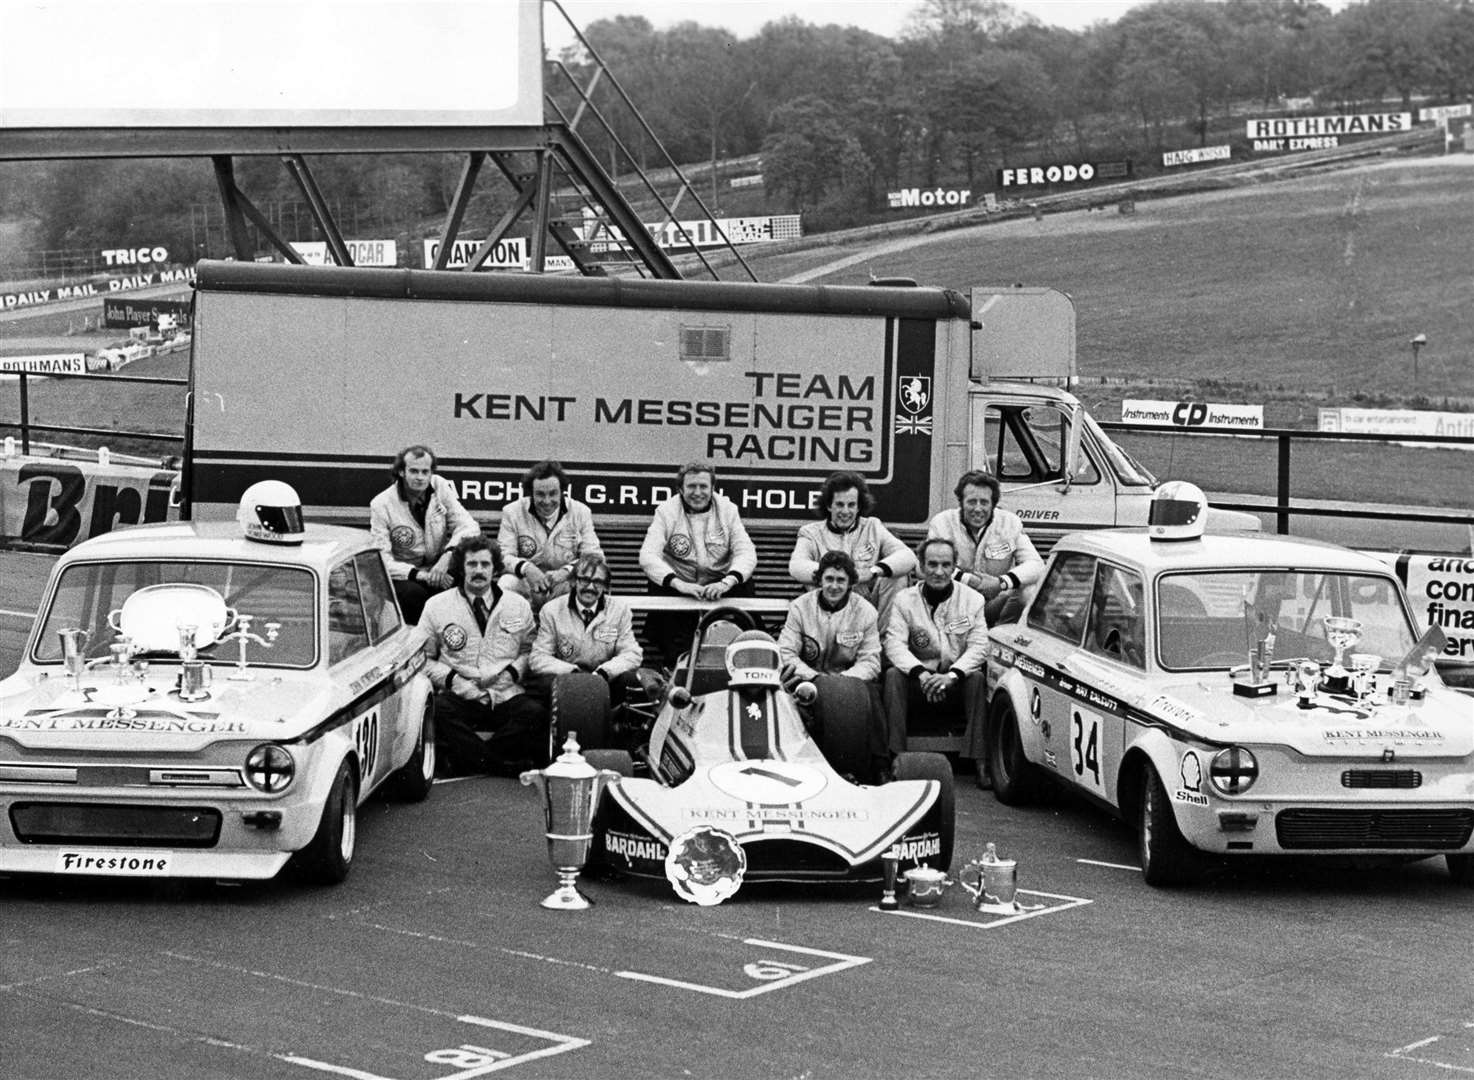 Team Kent Messenger Racing on the Brabham Straight at Brands Hatch. As well as supporting Brise's F3 effort in the early 1970s, the KM also backed two Hillman Imps in Special Saloons